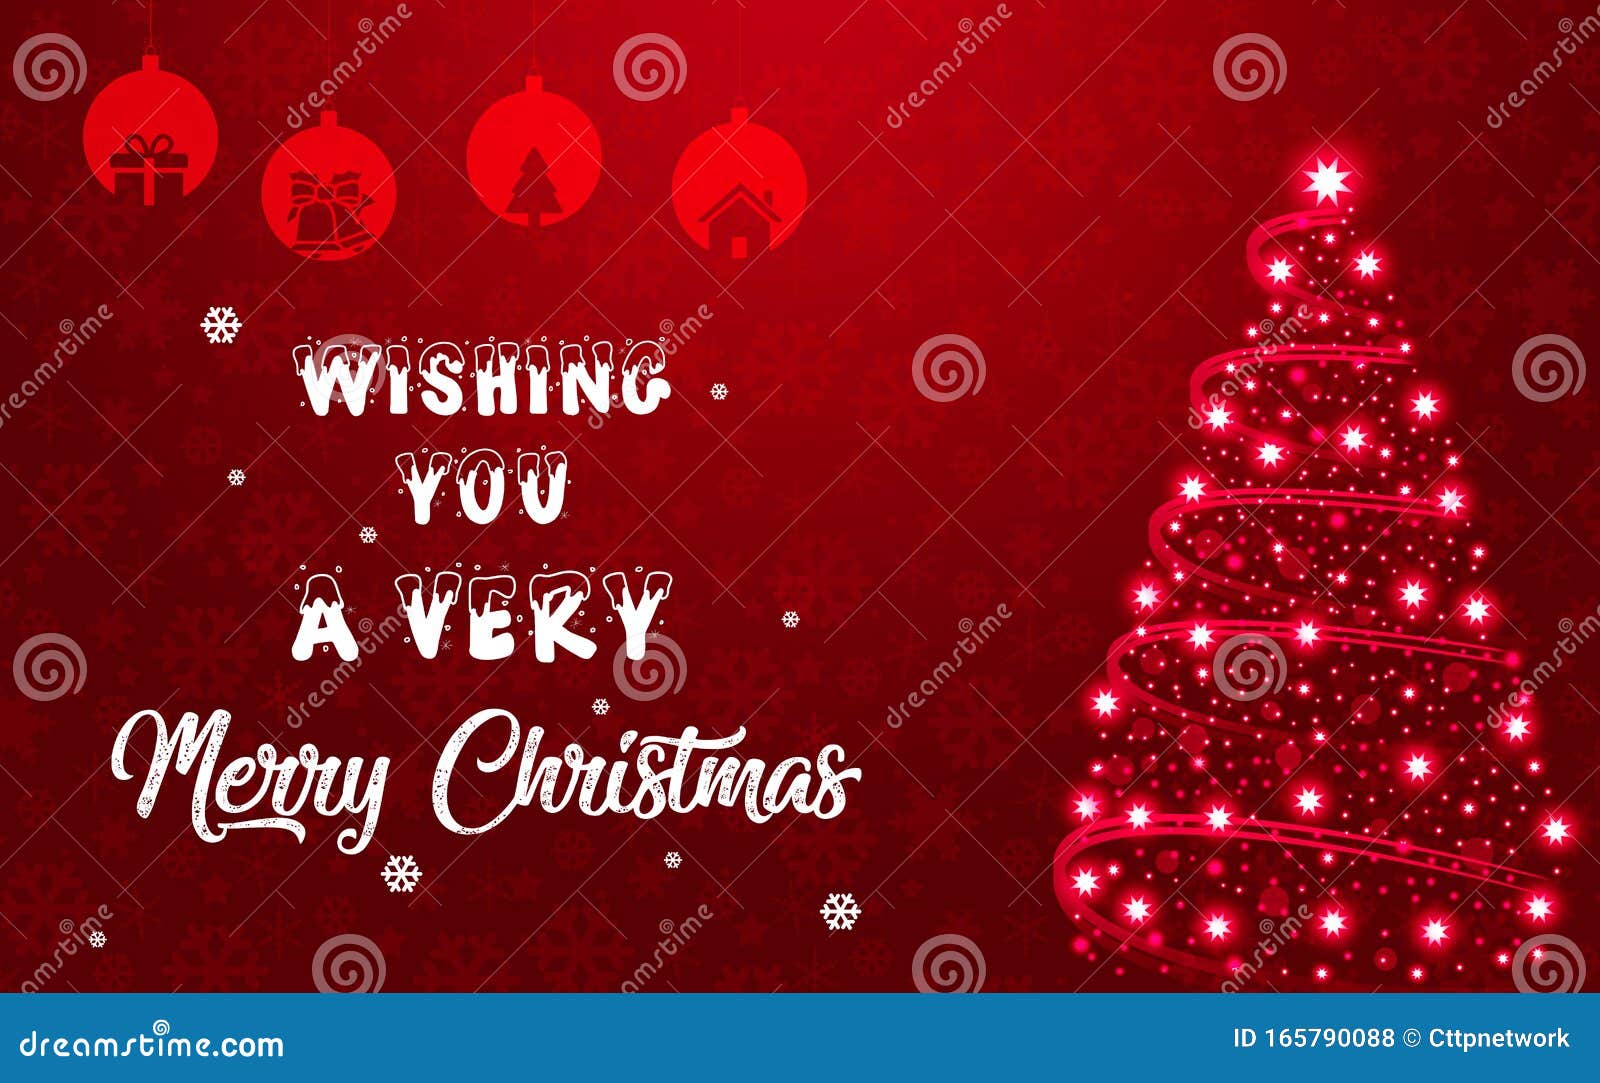 Wishing You a Very Merry Christmas Greetings Background Wallpaper ...